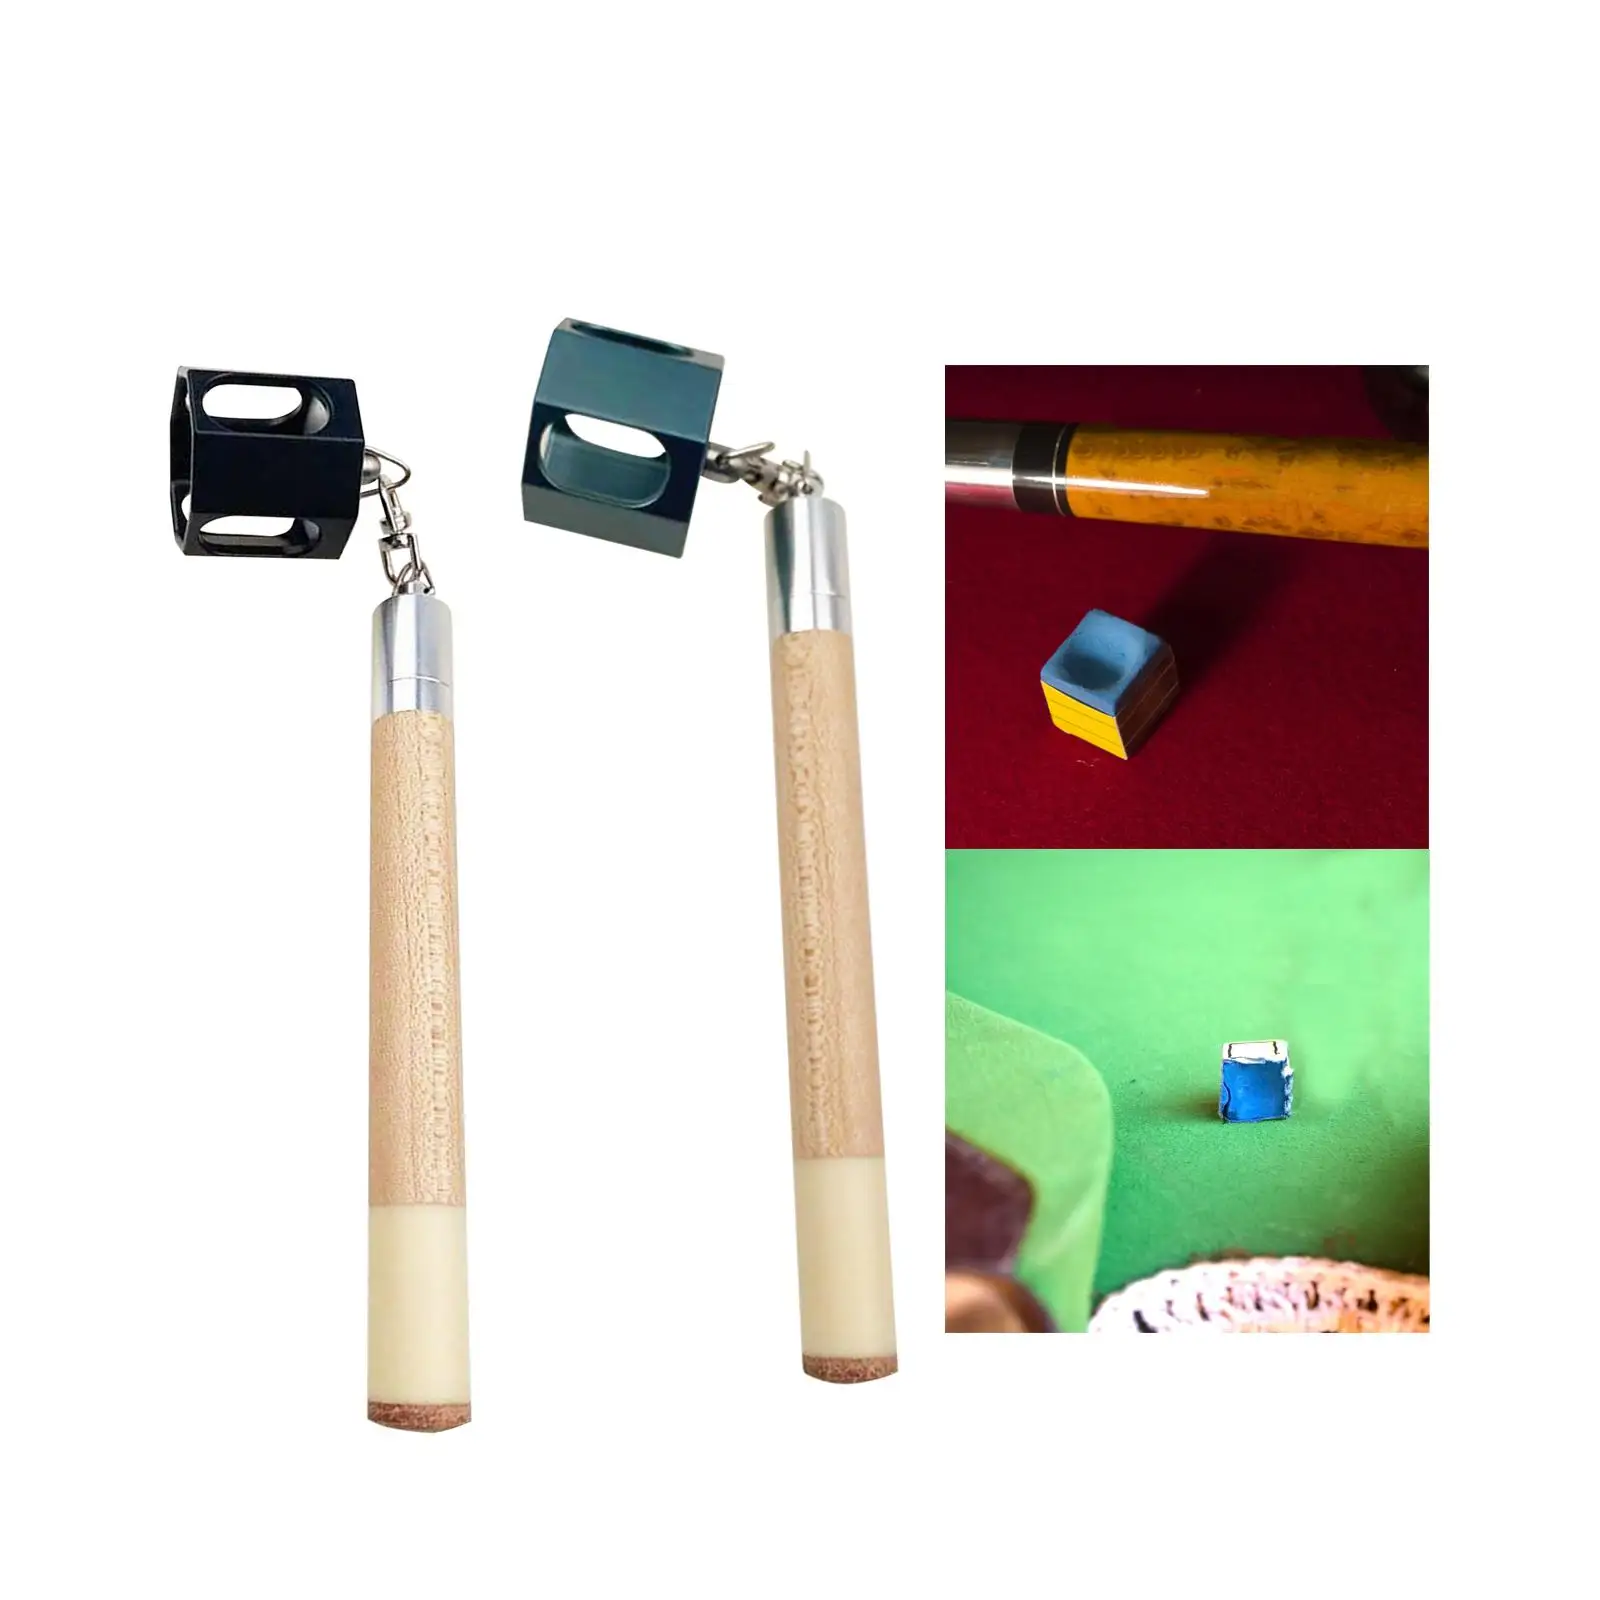 Billiards Snooker Pool Cue Chalk Holder Portable 2 in 1 Pocket Chalkers Cup Holders Scuffer Tacker 